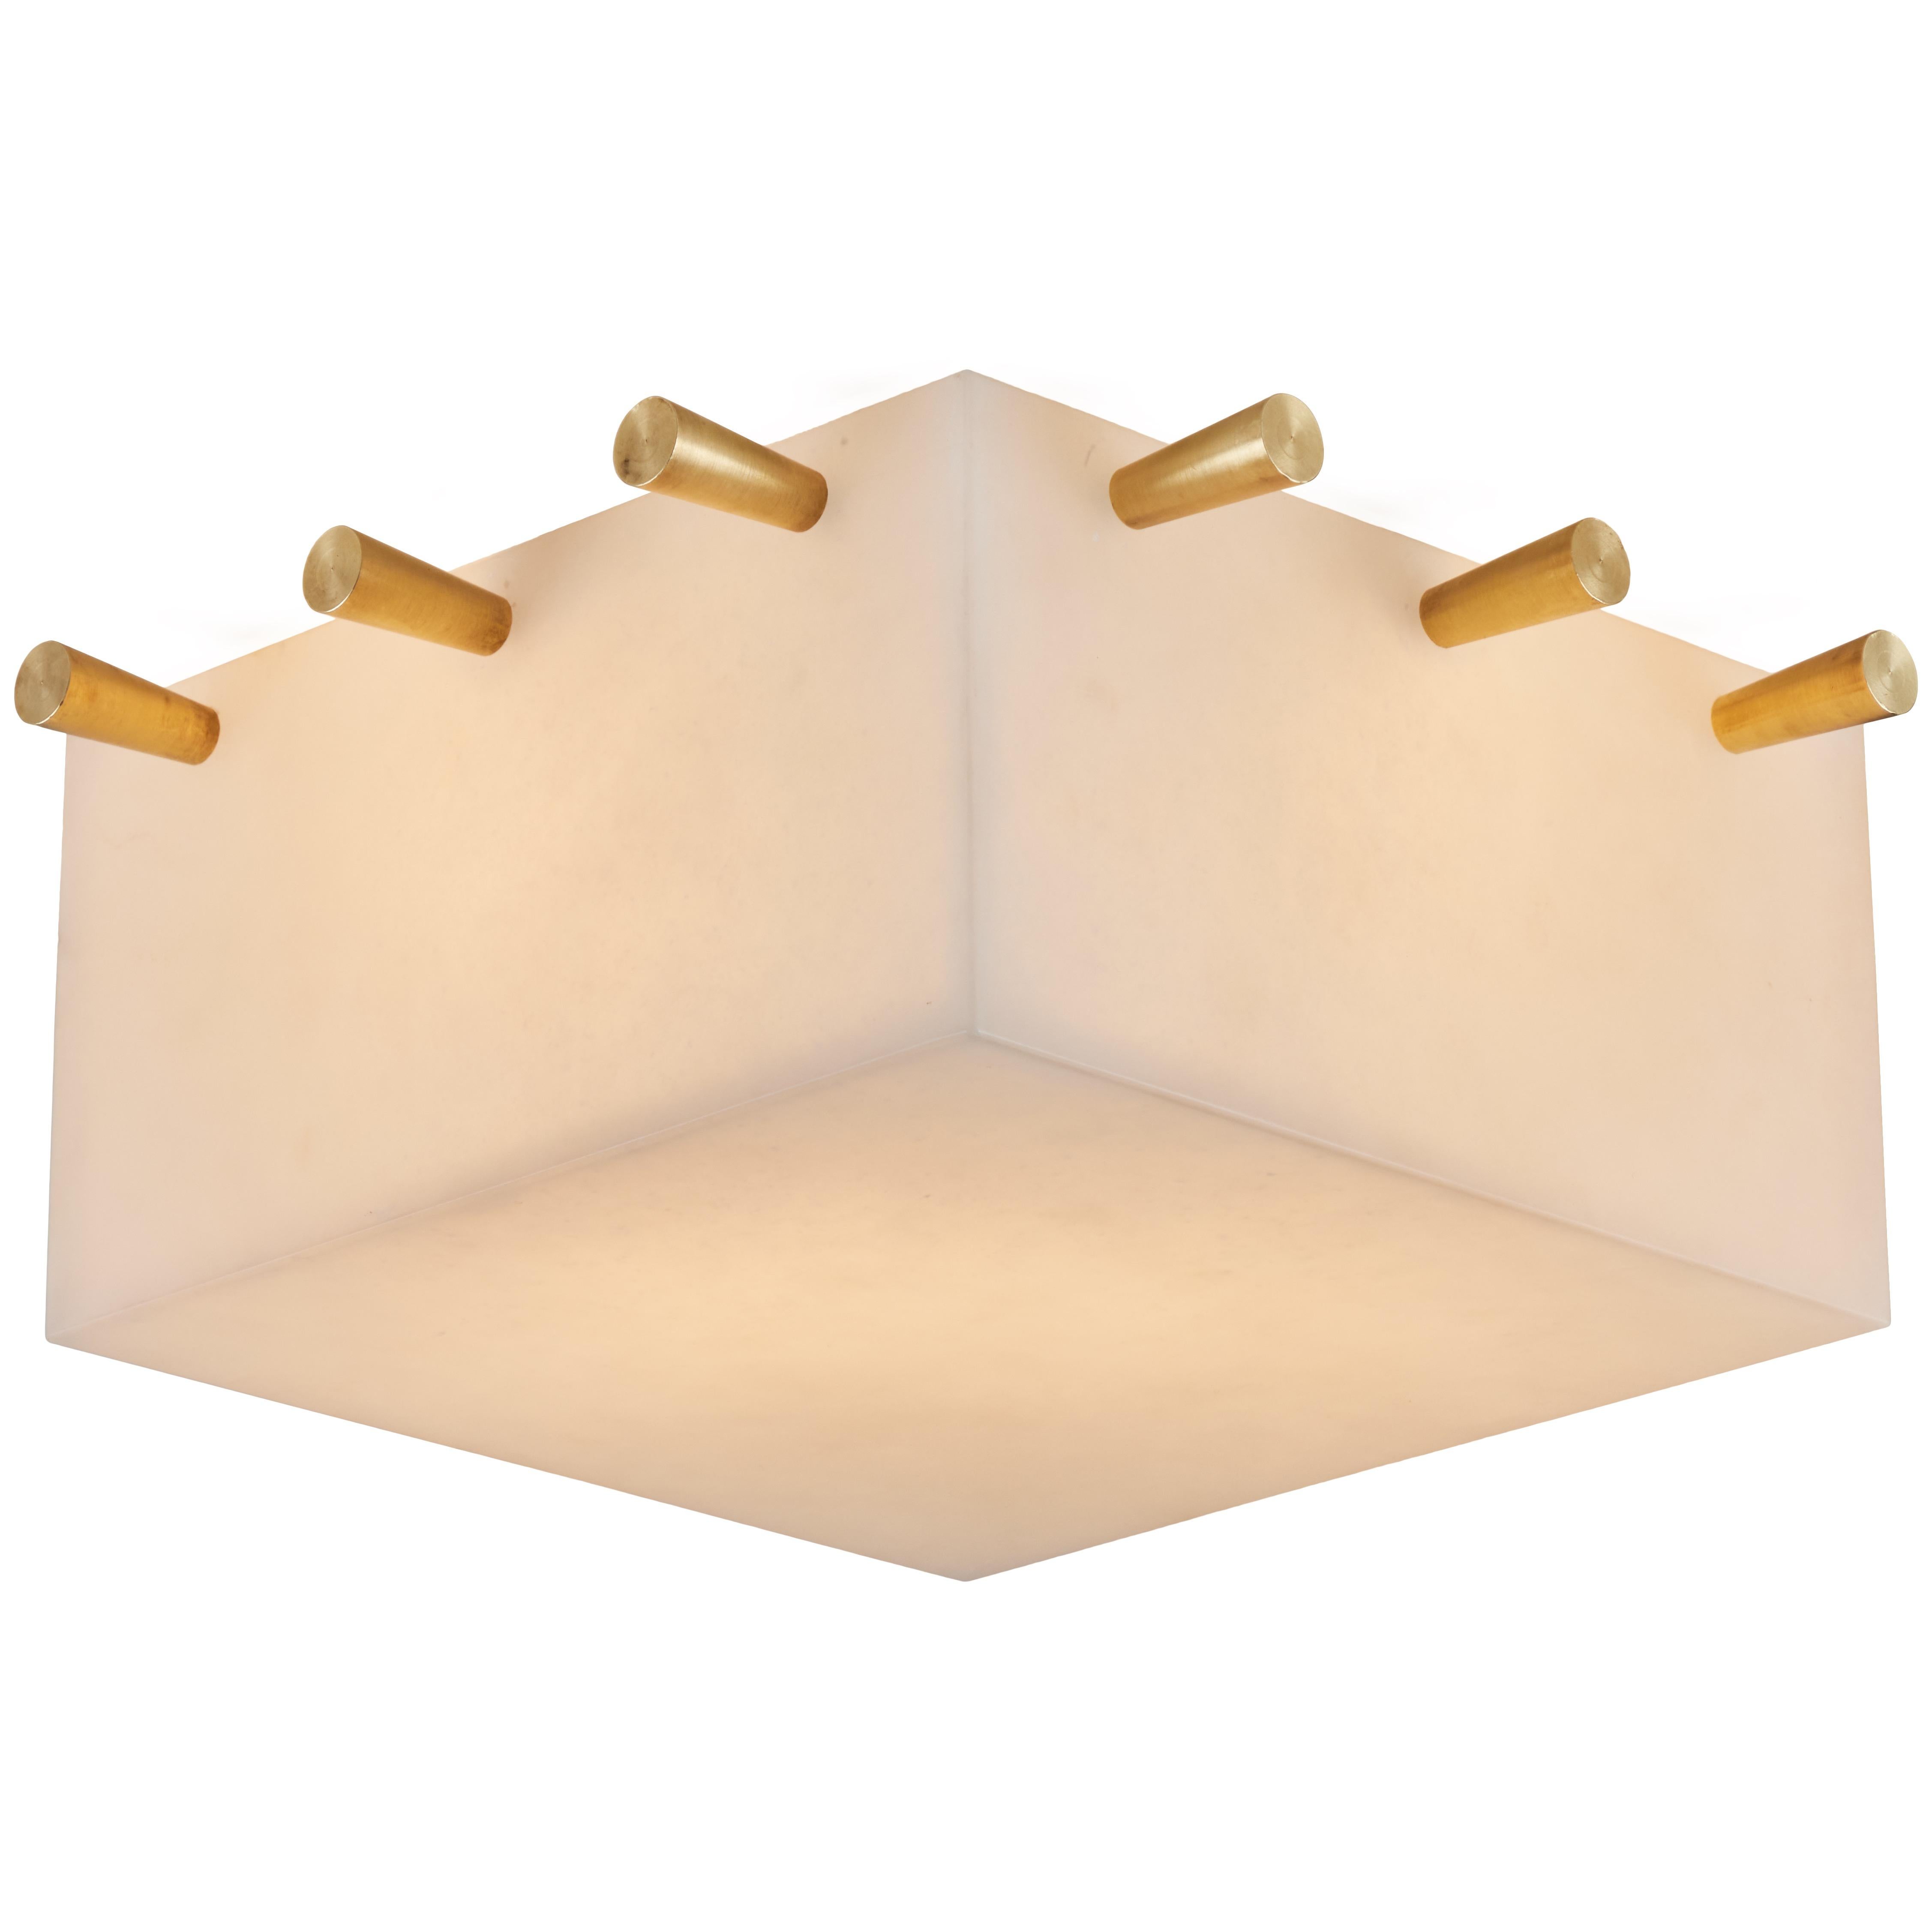 Modern 'Chapo' Alabaster and Brass Wall or Ceiling Lamp by Denis De La Mesiere For Sale